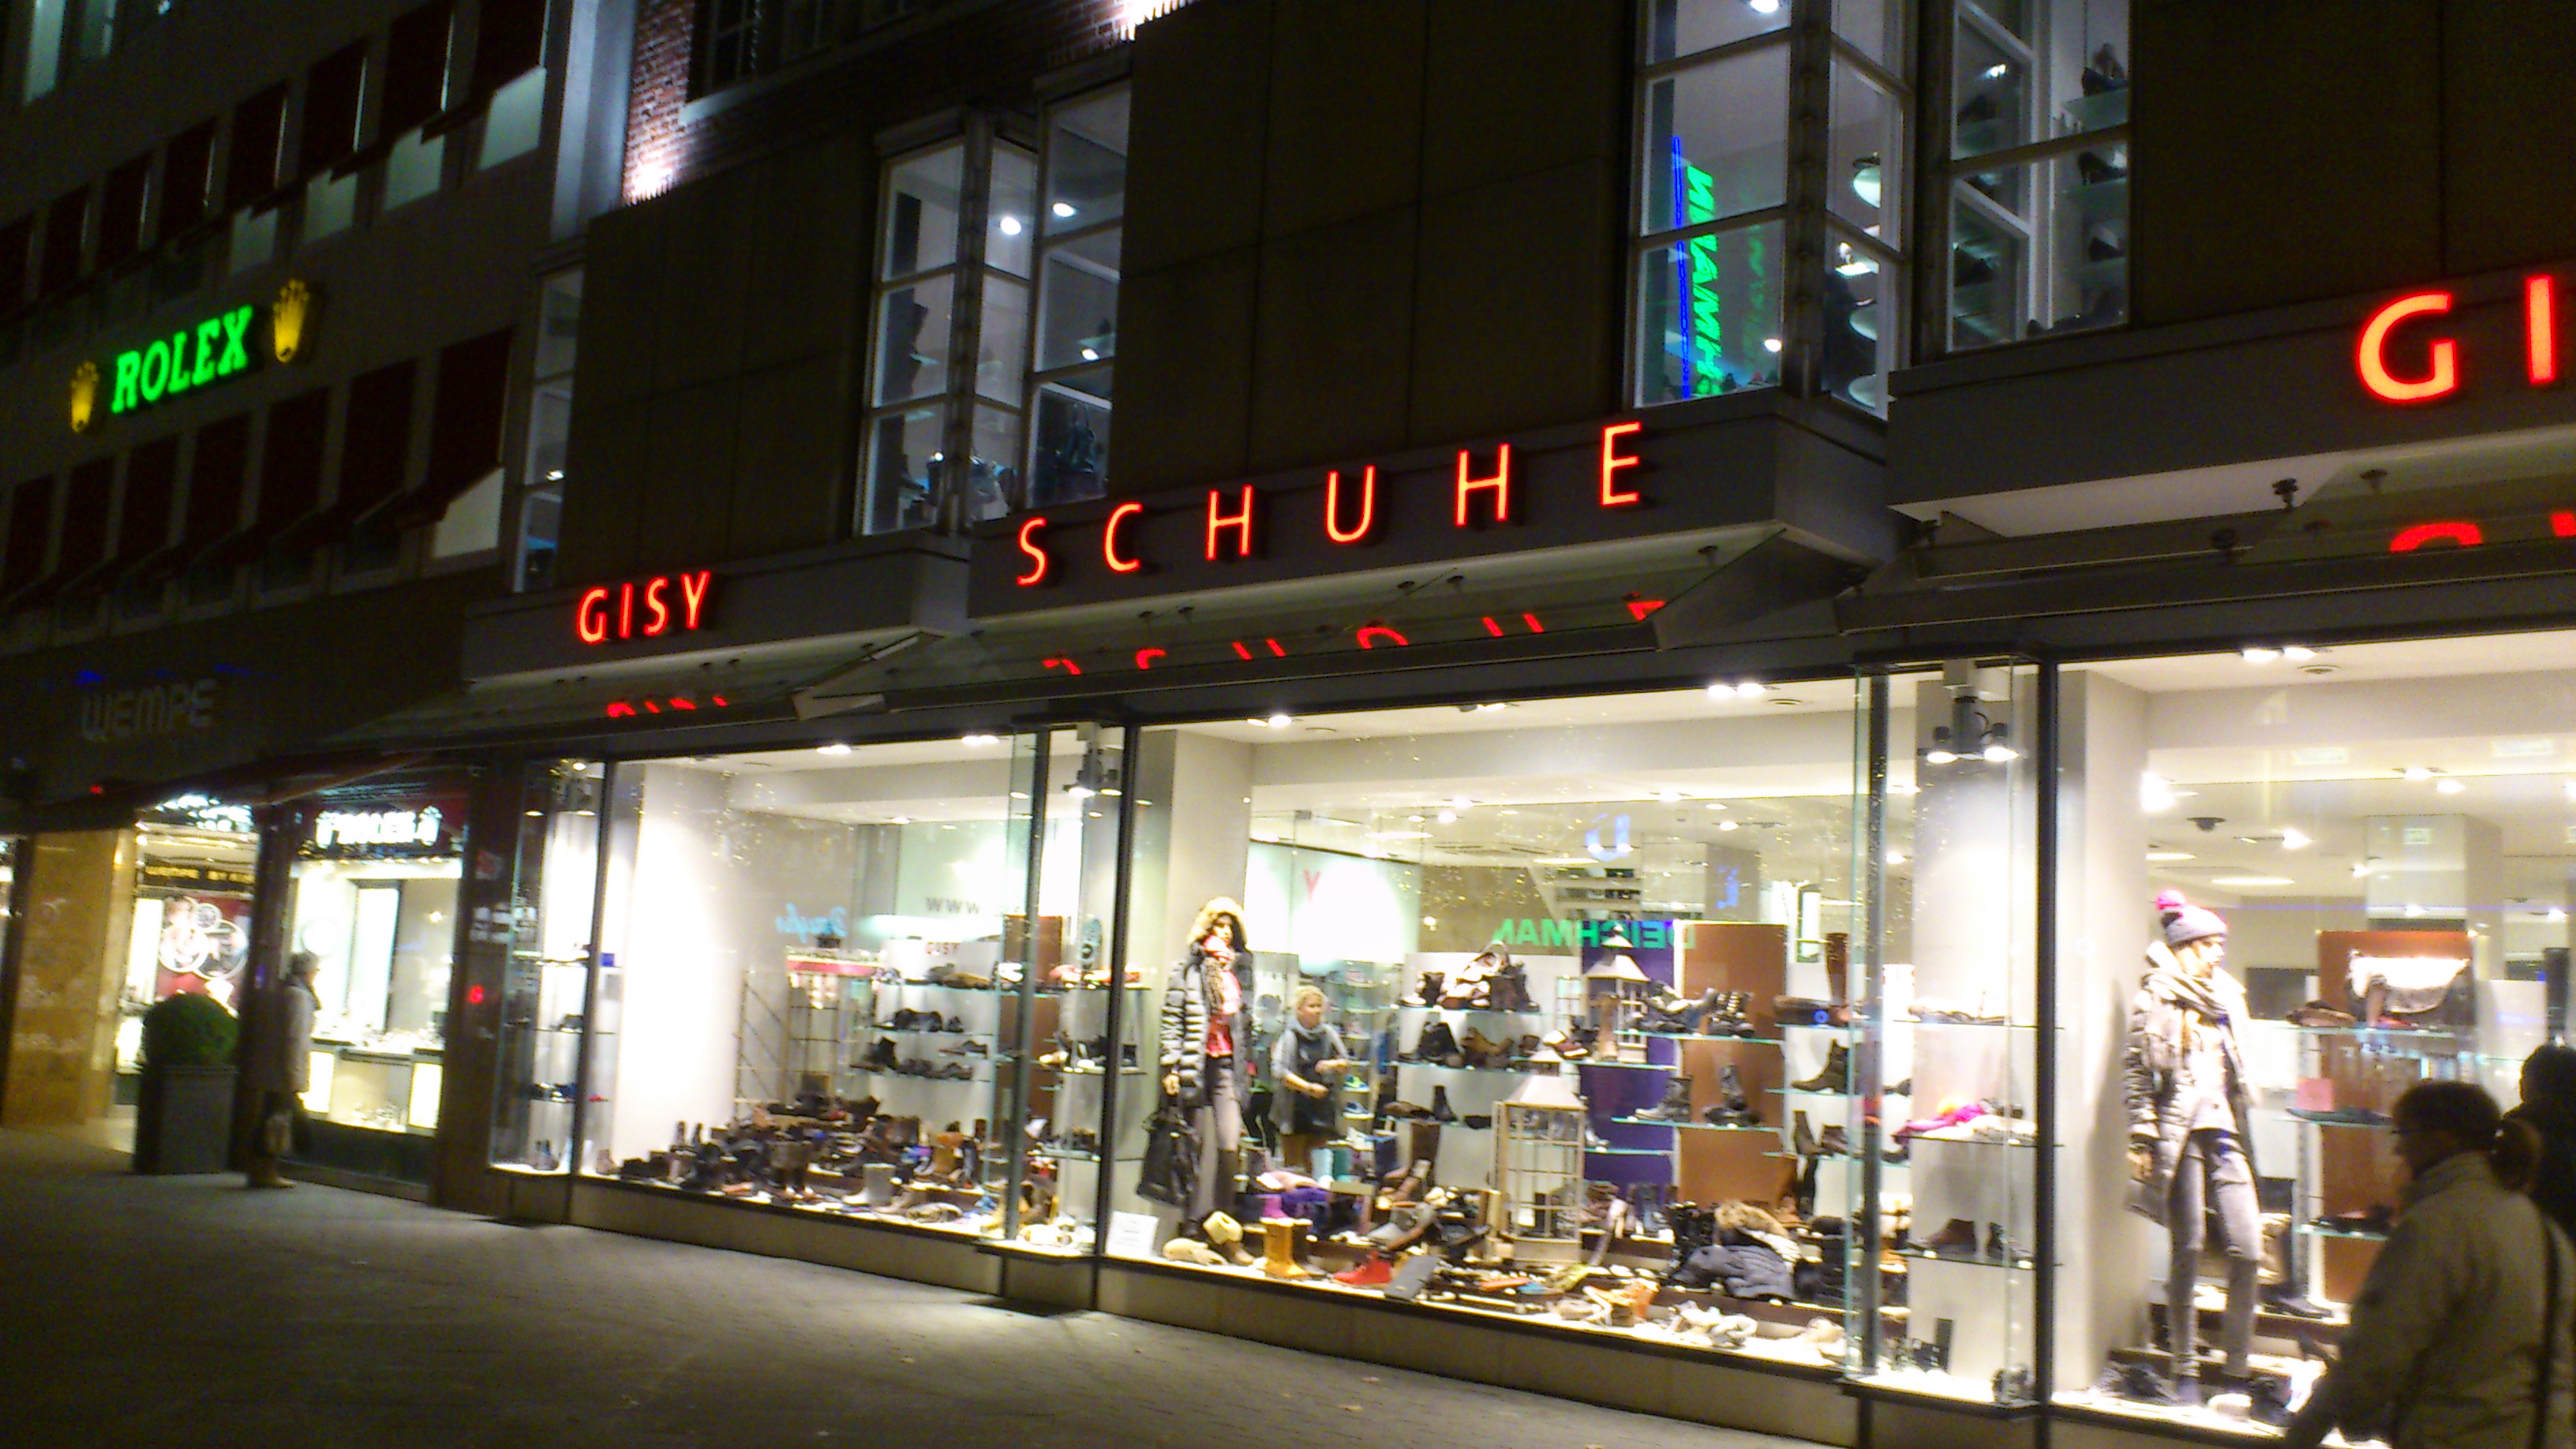 Gisy Schuhe GmbH & Co. in 30159 Hannover-Mitte